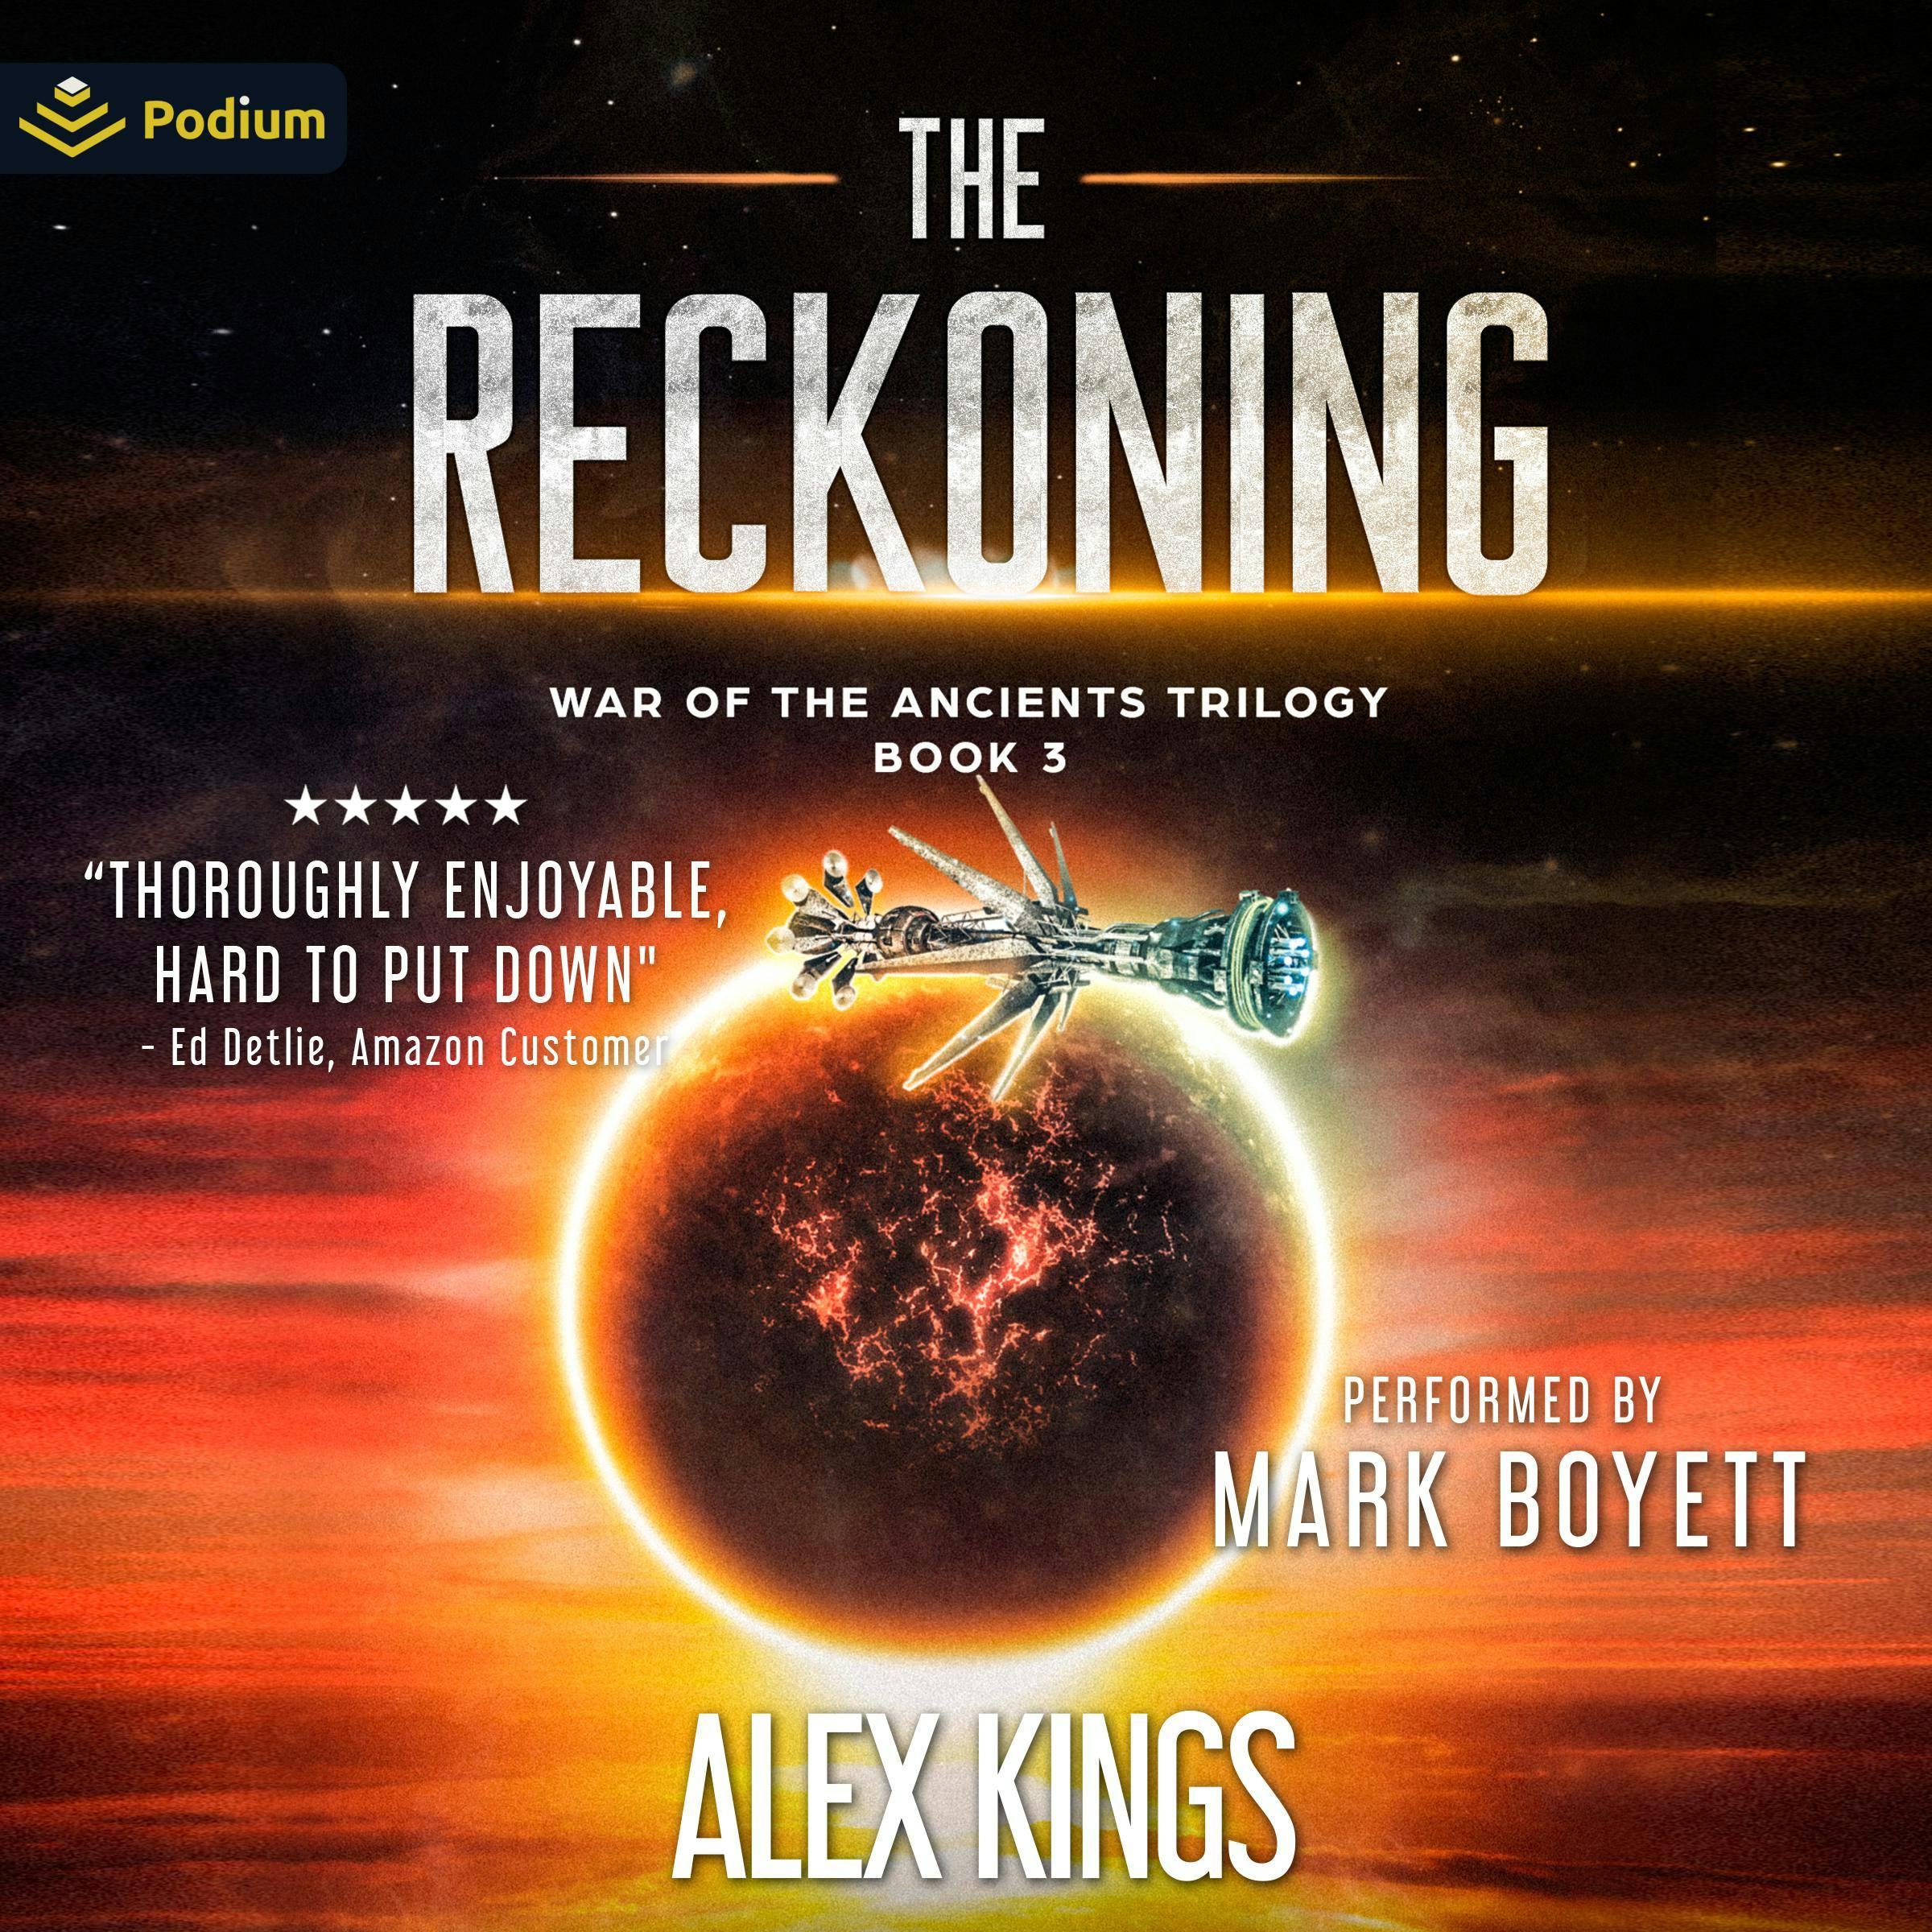 The Reckoning: War of the Ancients Trilogy, Book 3 - Alex Kings